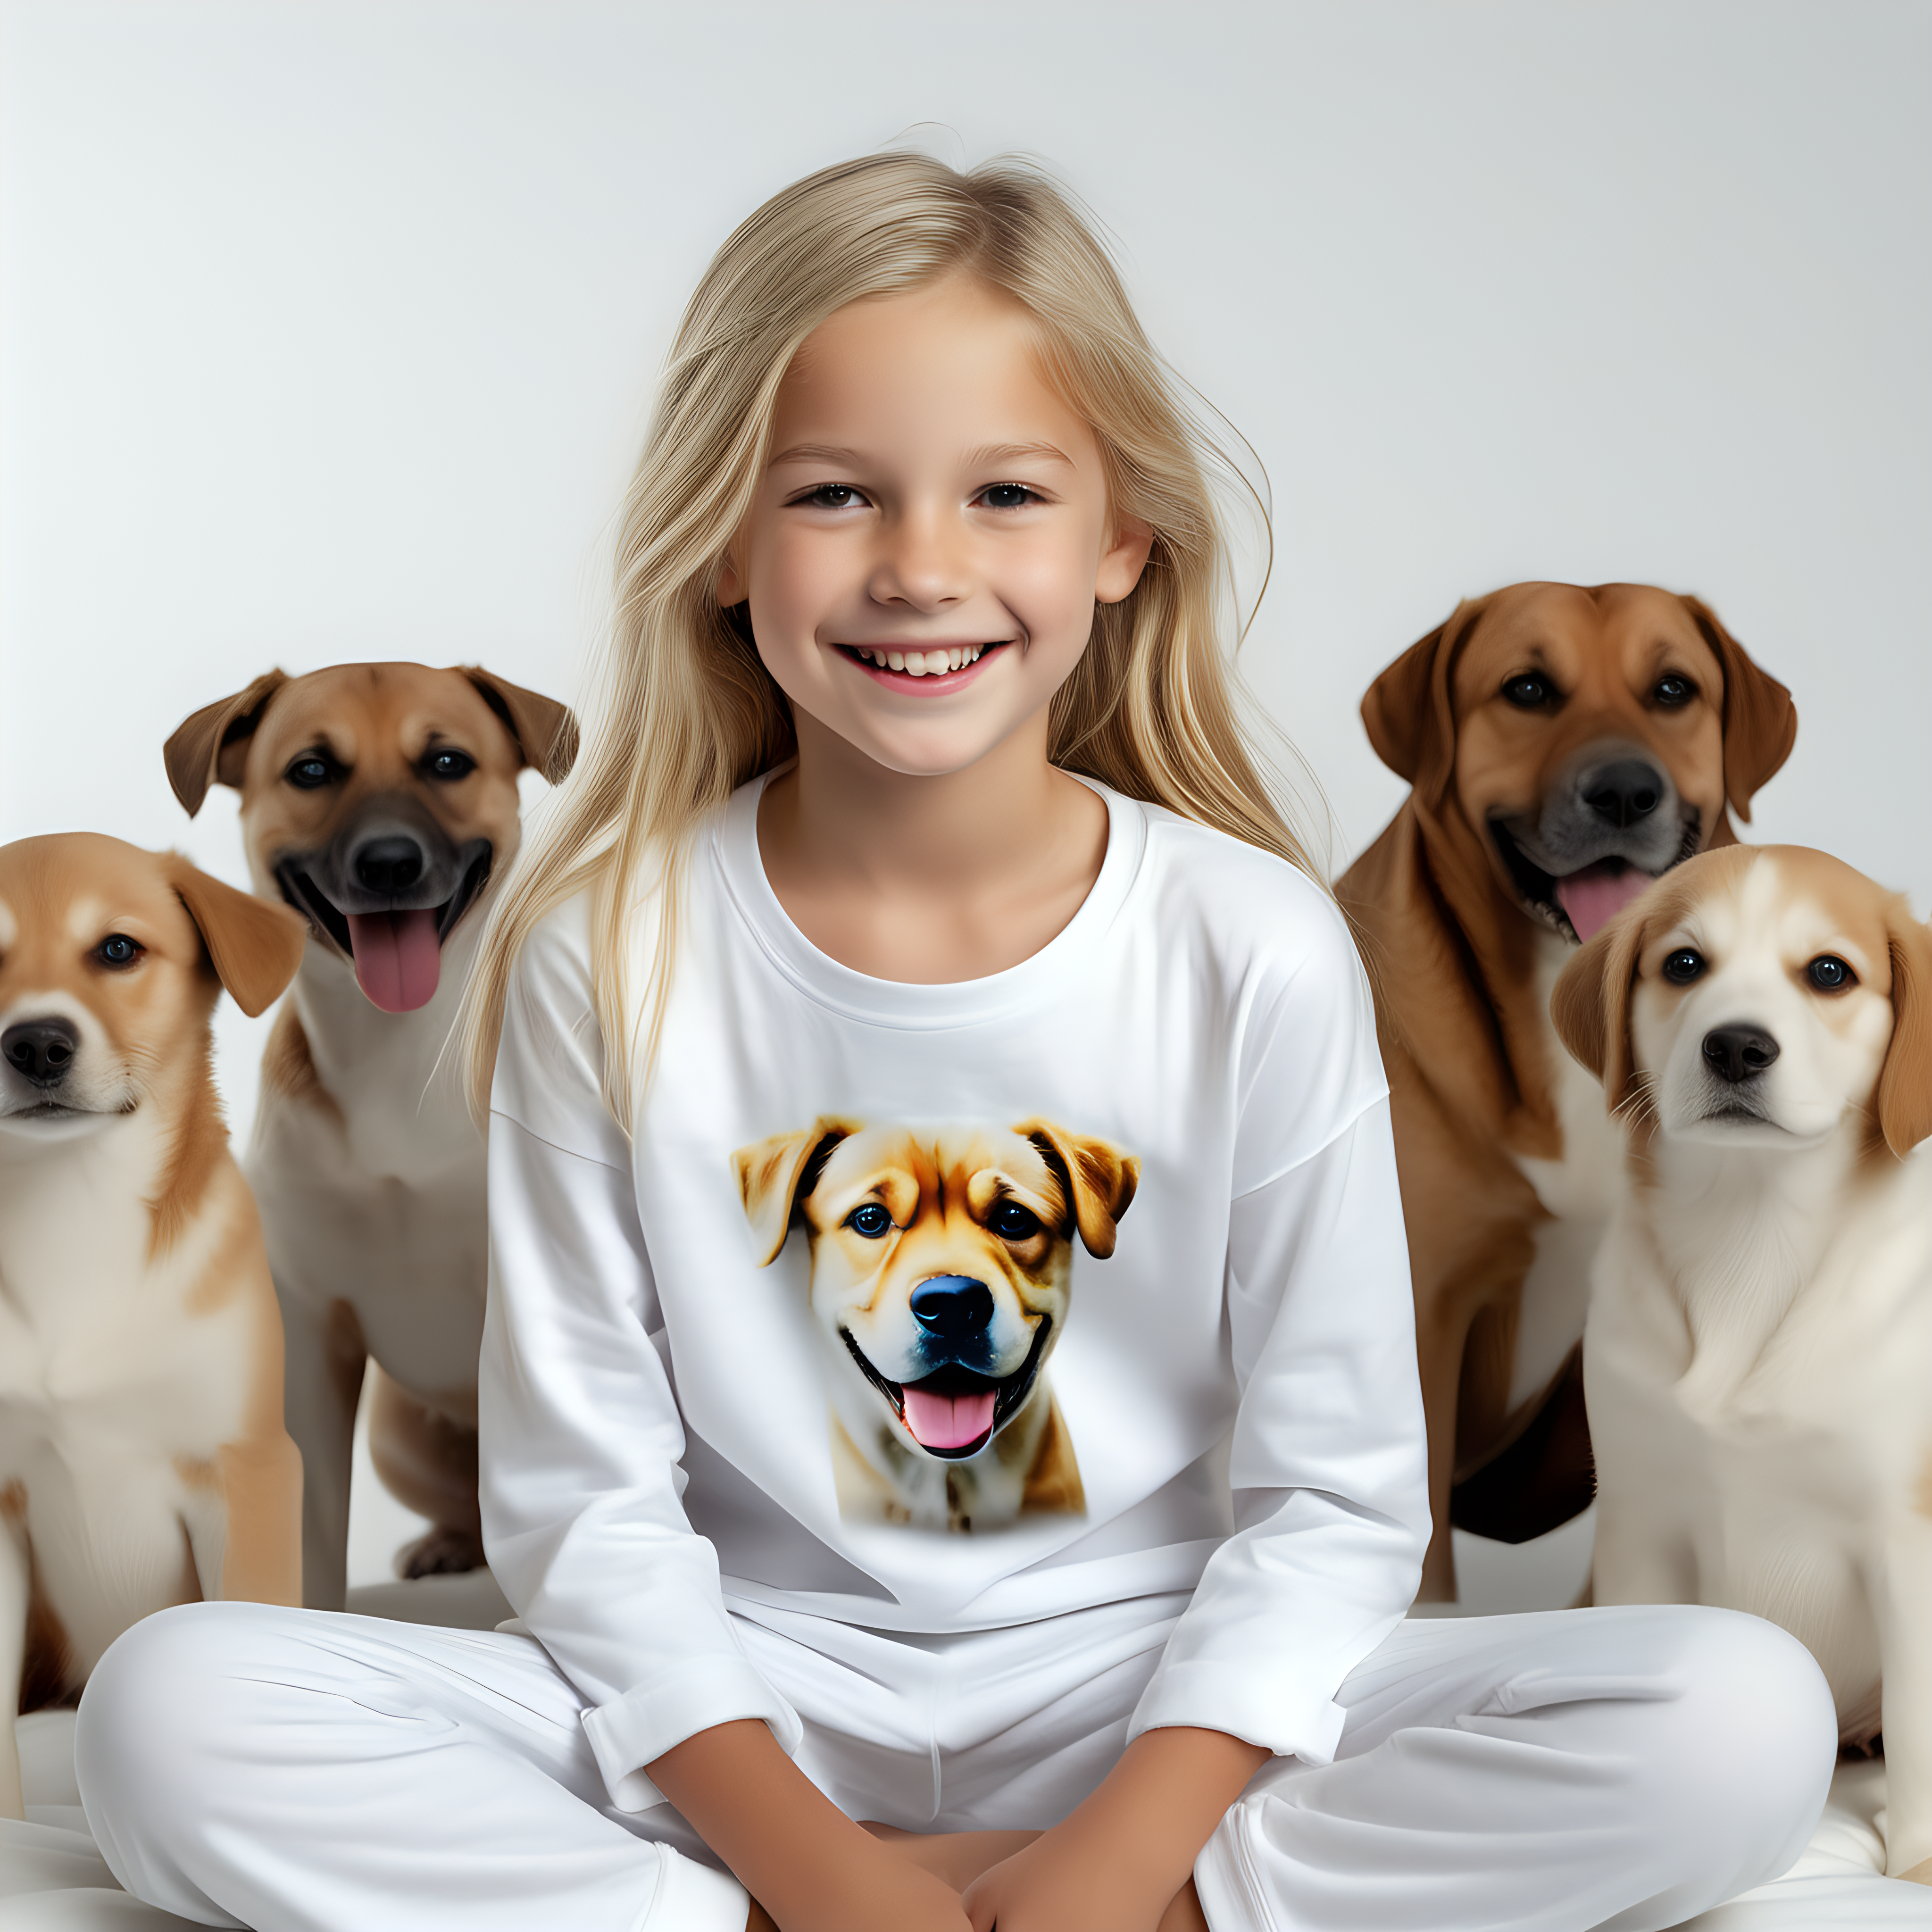 “Perfect Facial Features photo of a blonde smiling 10 year old girl sitting surrounded by dogs, in  white cotton tshirt pyjama (no print, long  tight cuff sleeves, loose long pants) , no background, hyper realistic, ideal face template, HD, happy, Fujifilm X-T3, 1/1250sec at f/2.8, ISO 160, 84mm”